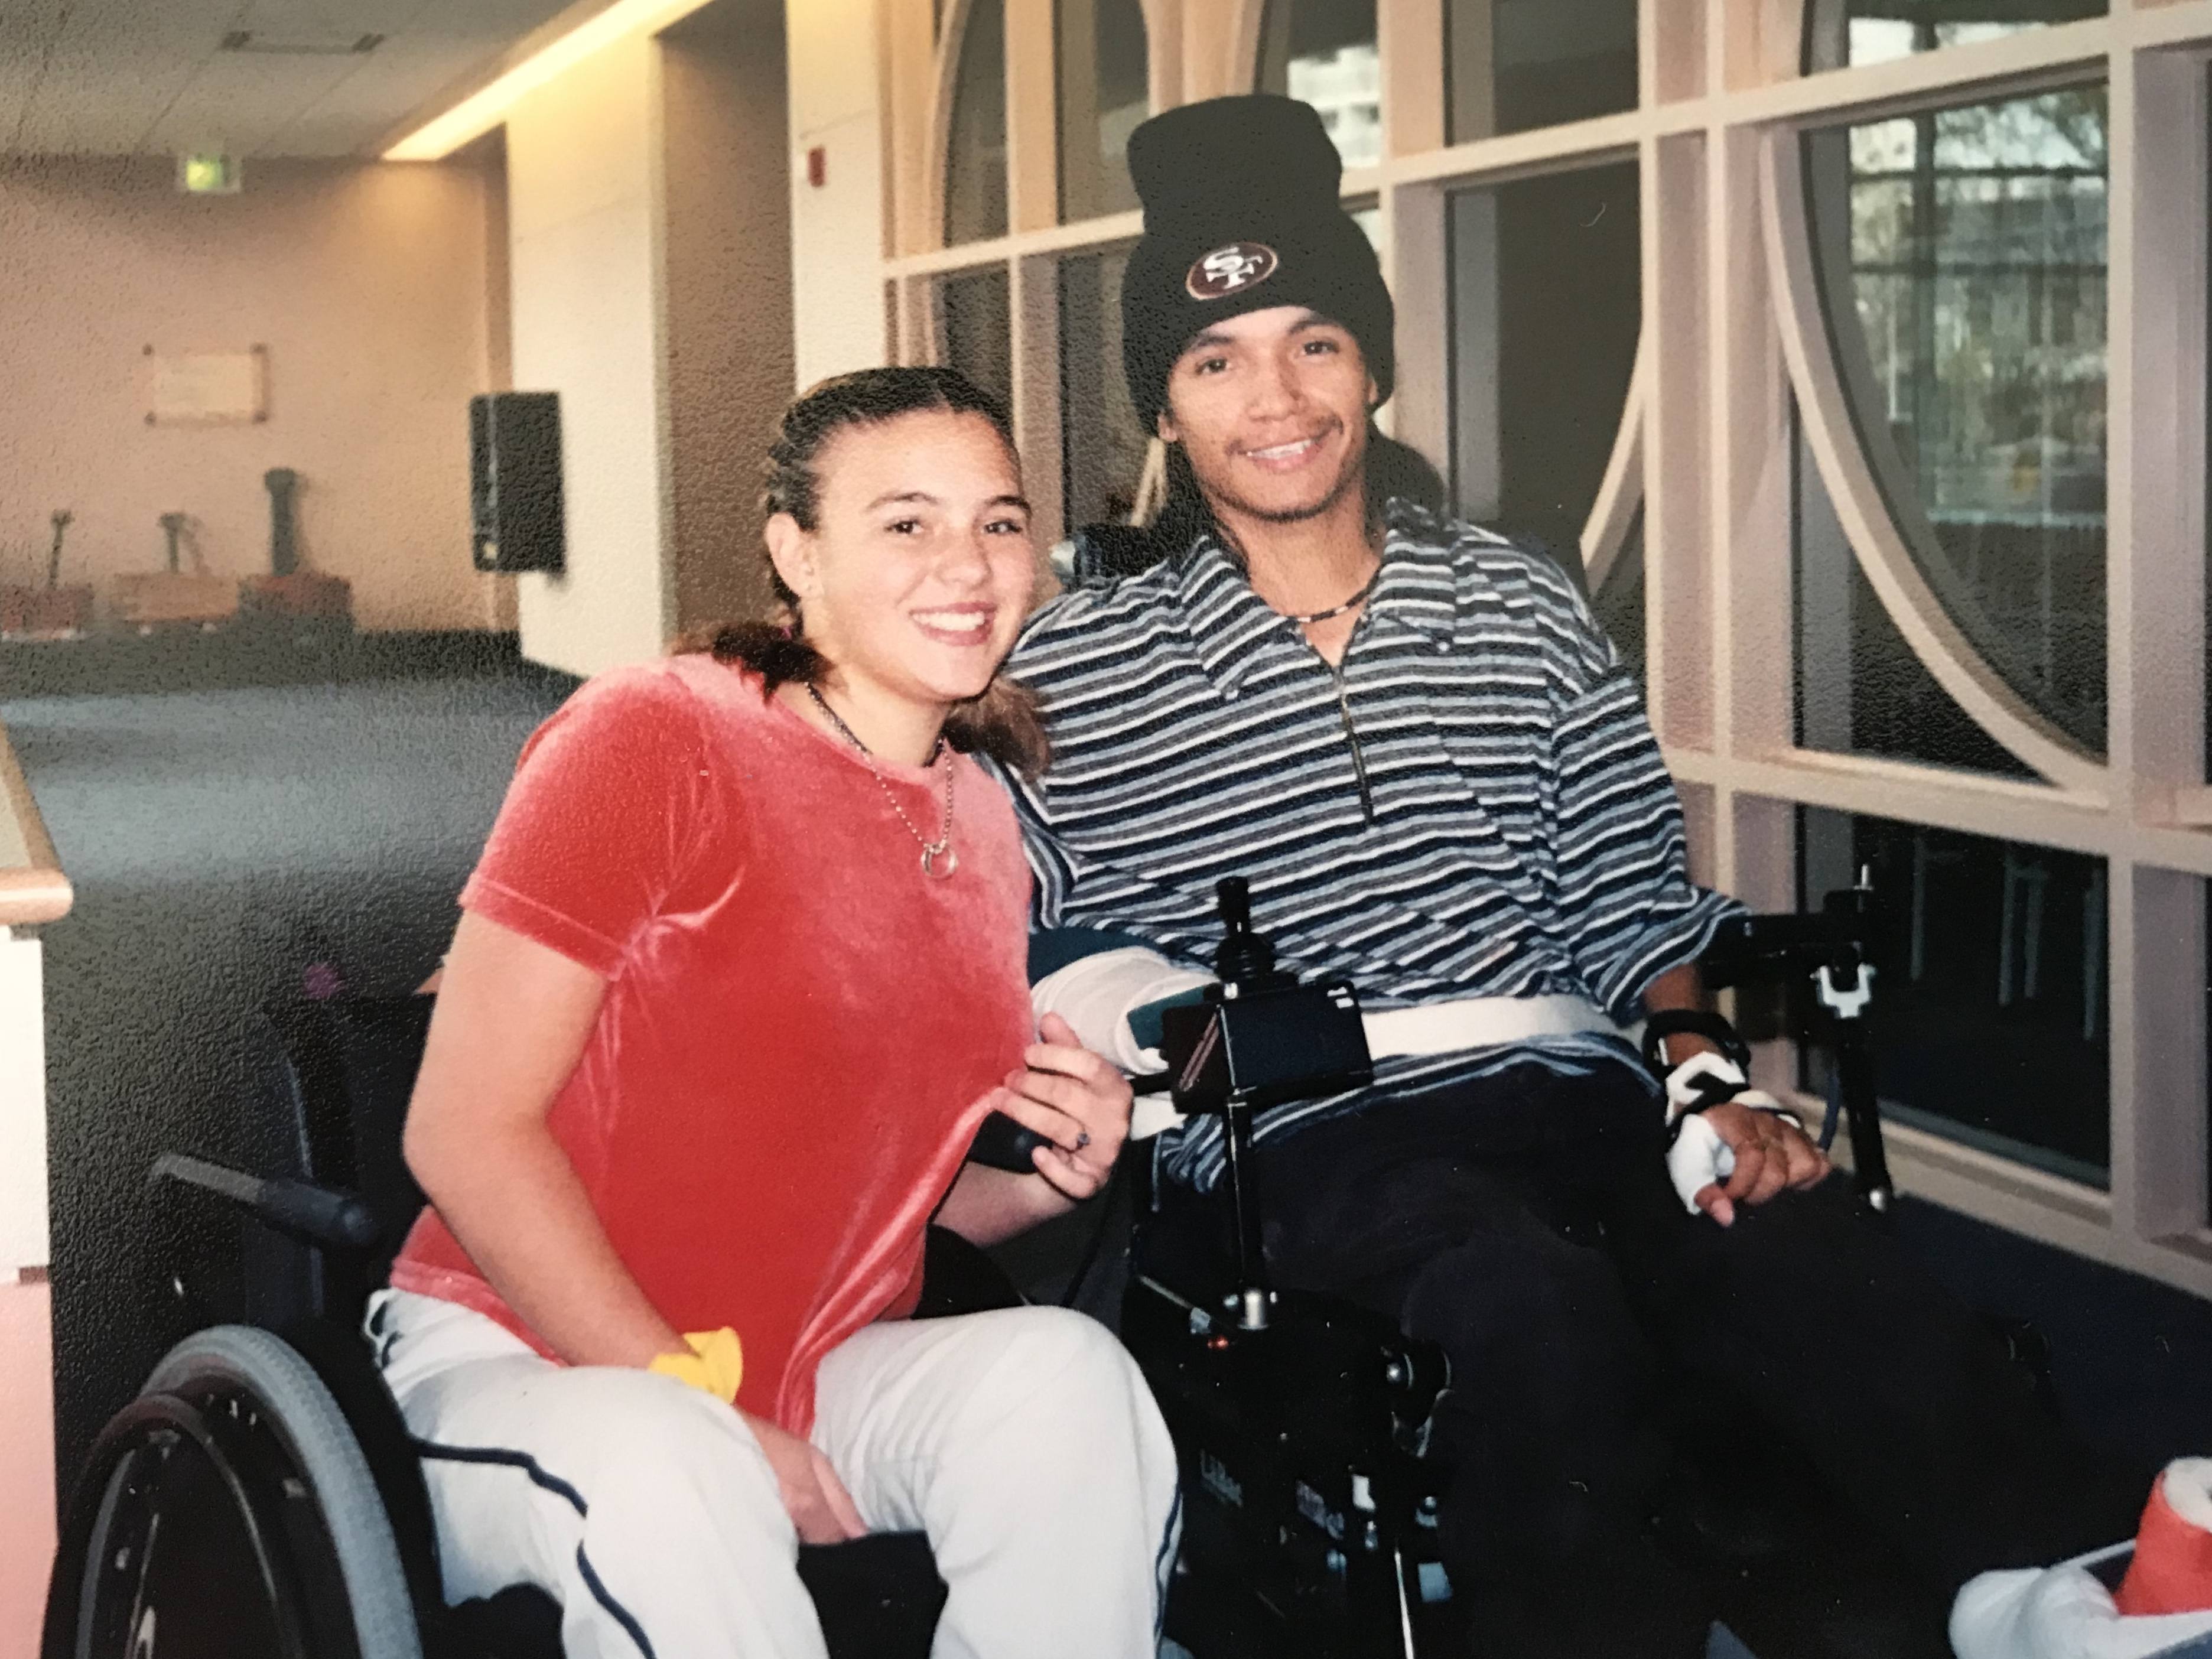 Kristina Rhoades, at 14, with her friend Abraham, from Mexico, at Shriners Hospital of Northern California.